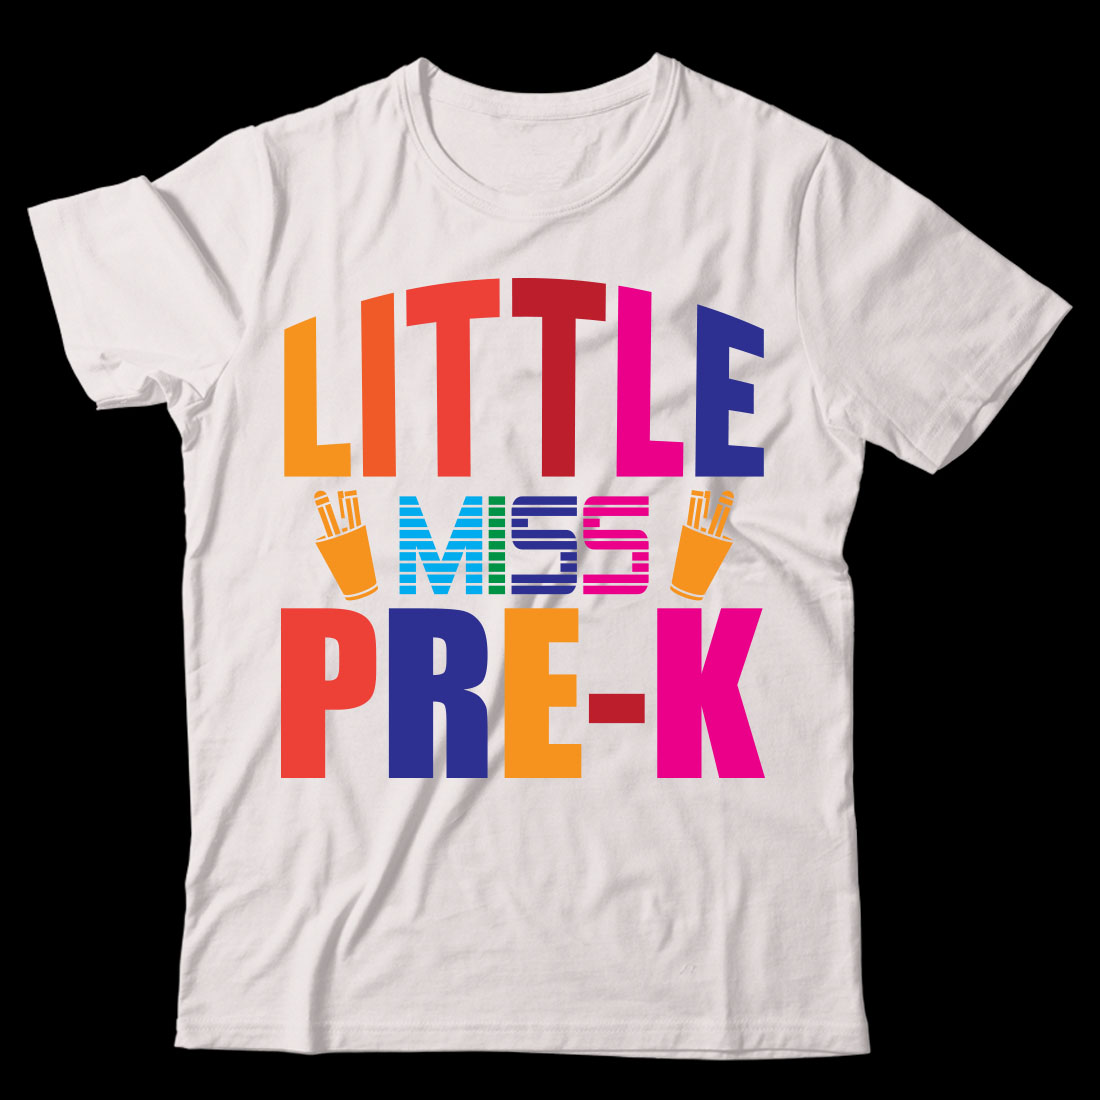 White t - shirt with the words little miss prek on it.